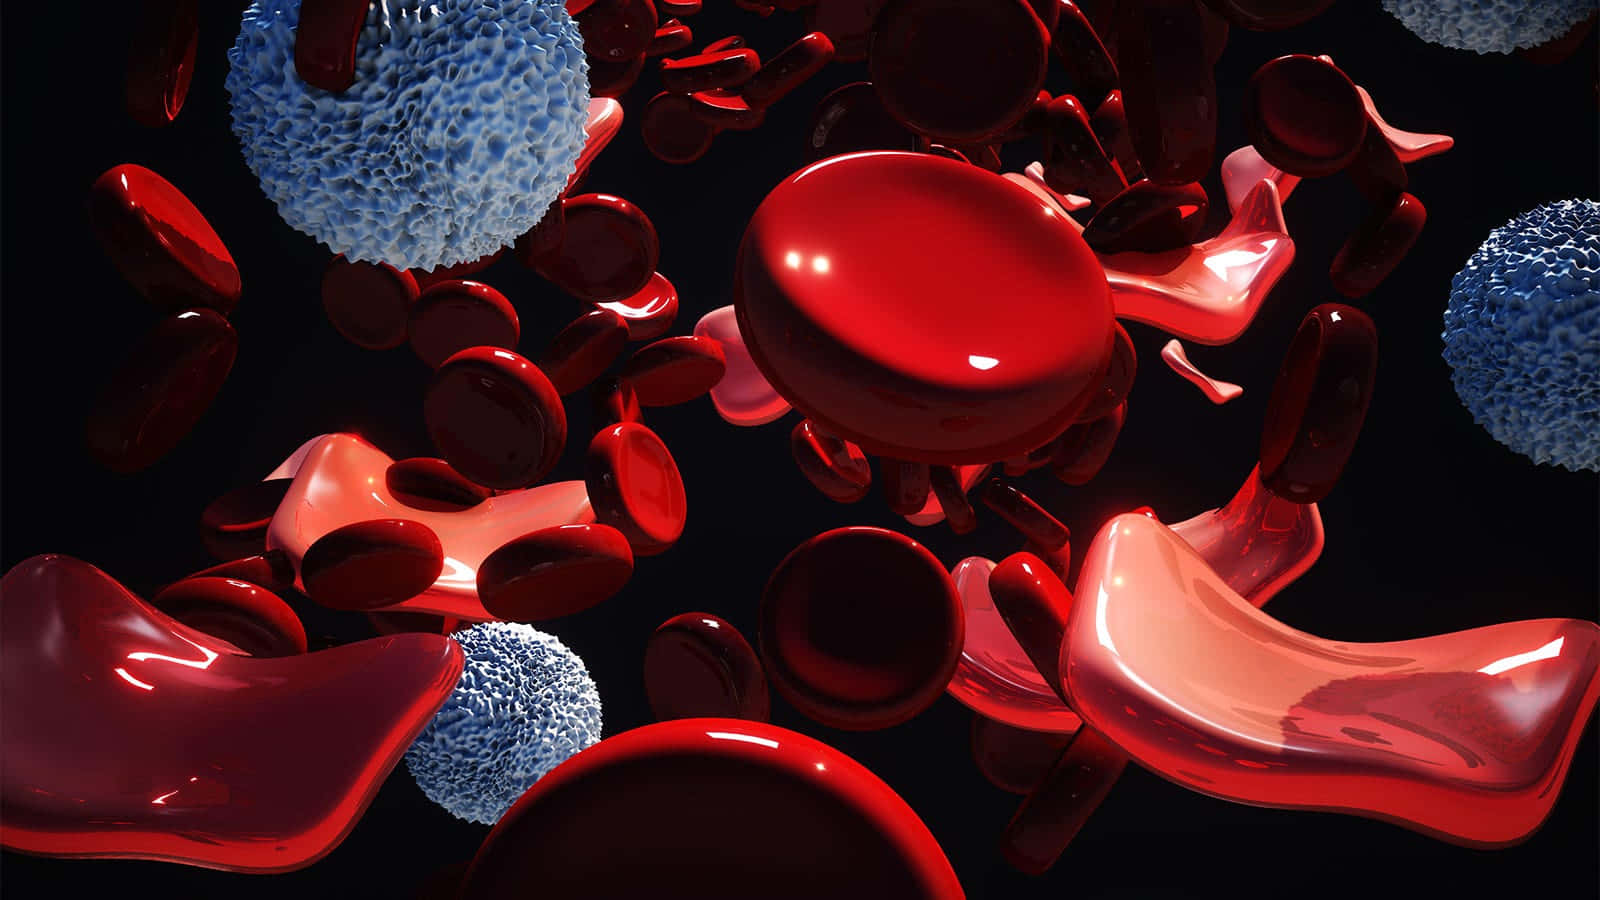 Vibrant Red Blood Cells Close-up Wallpaper